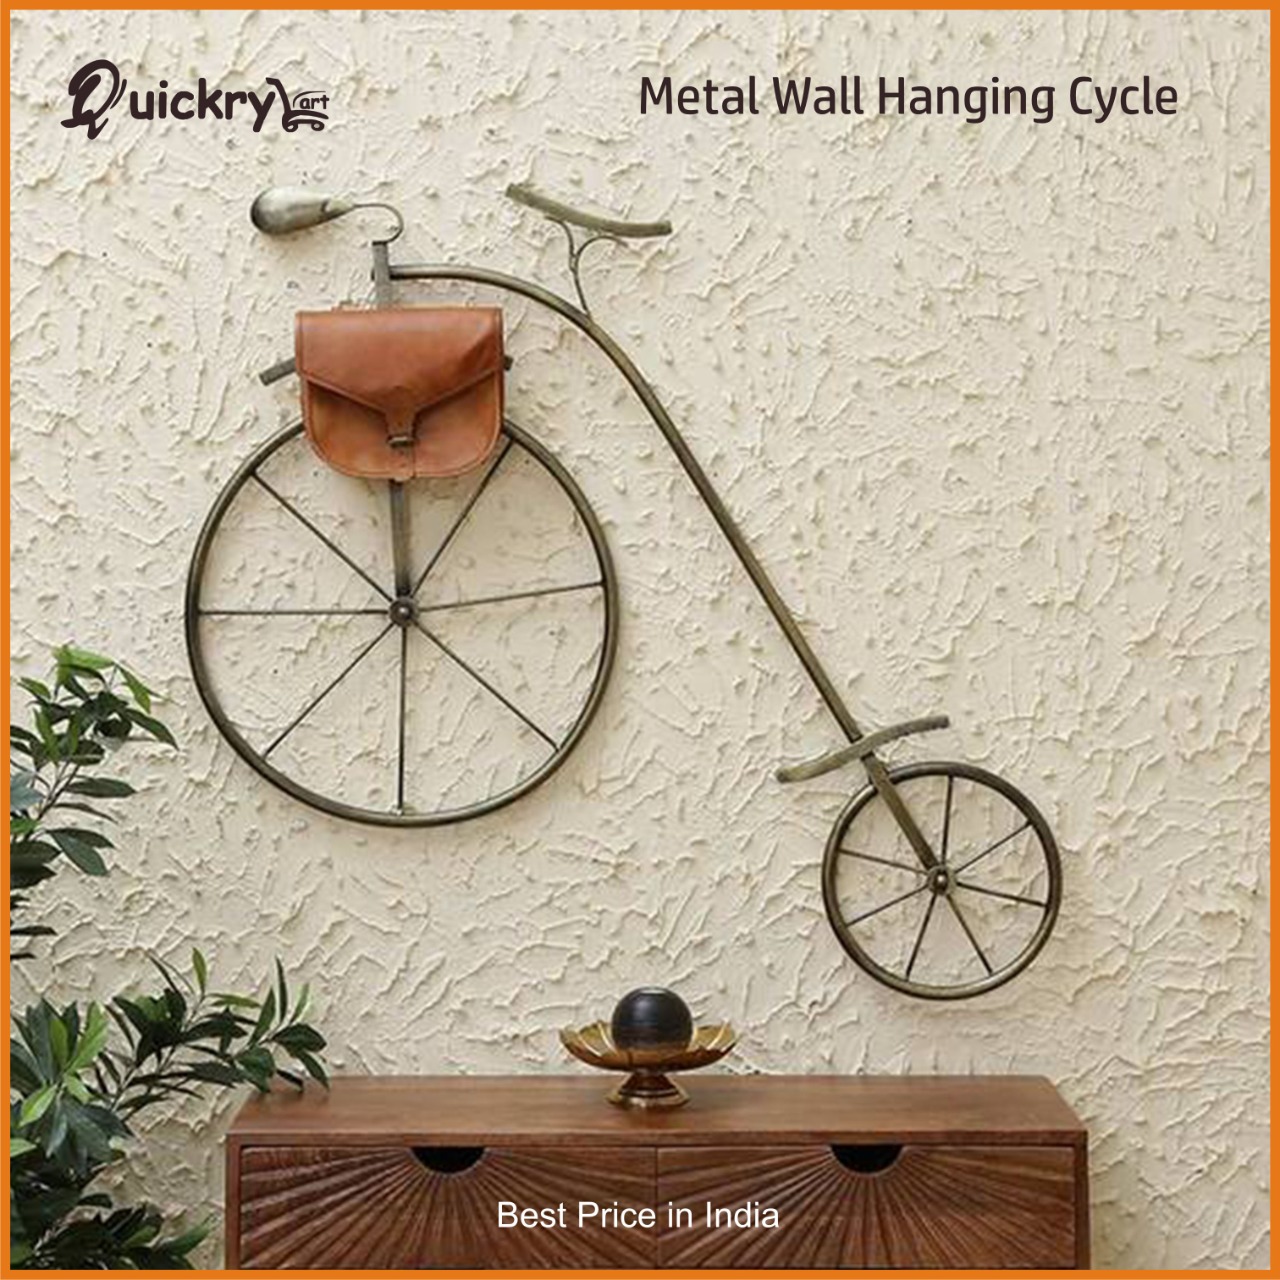 Home Decor Online: at Quickrycart | Home Decor items | Home decor online IndiaHome and LifestyleHome Decor - FurnishingsGurgaonWazirabad